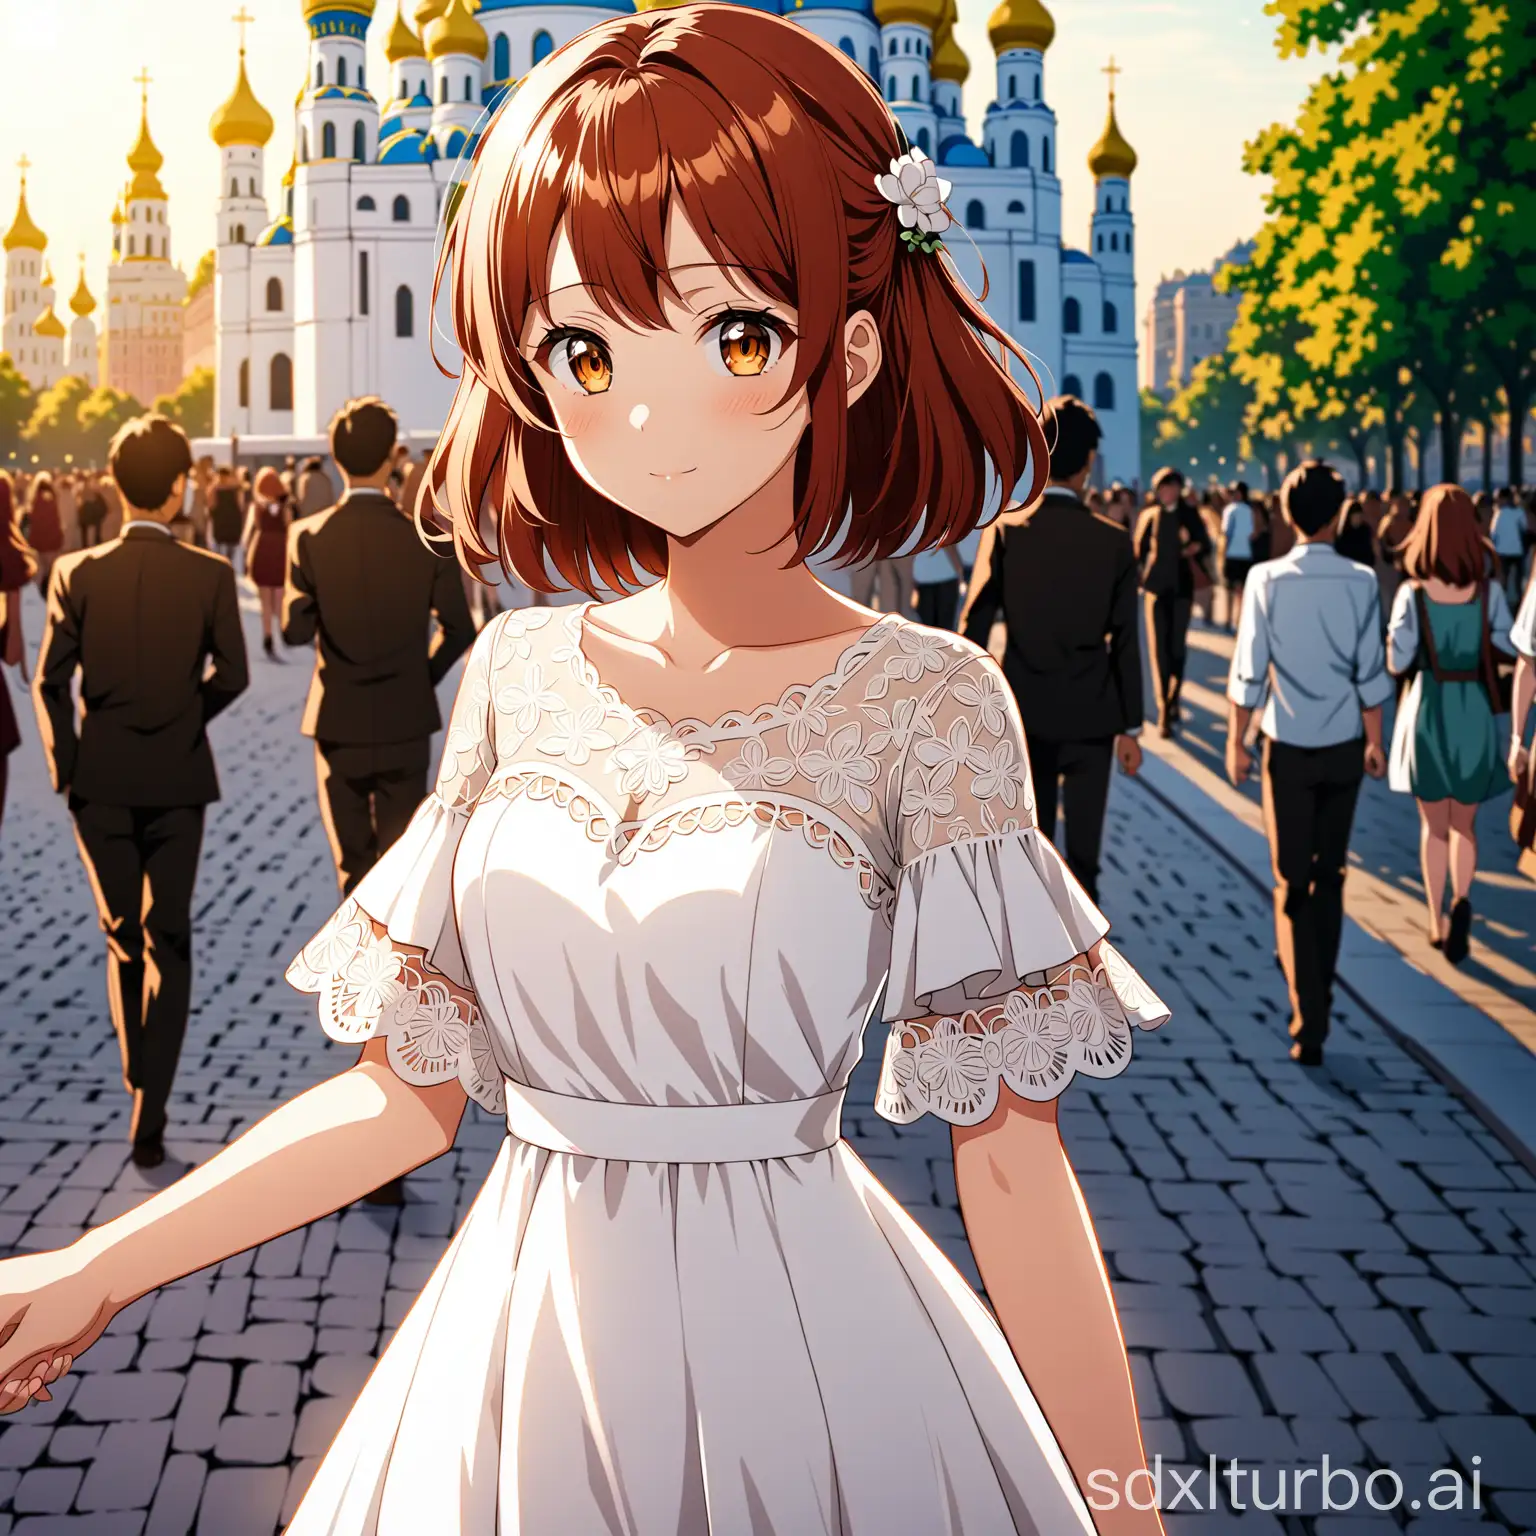 An anime girl with reddish-brown hair in a white floral dress holds my hand, only my hand is visible in the frame, and in the background is Kiev.